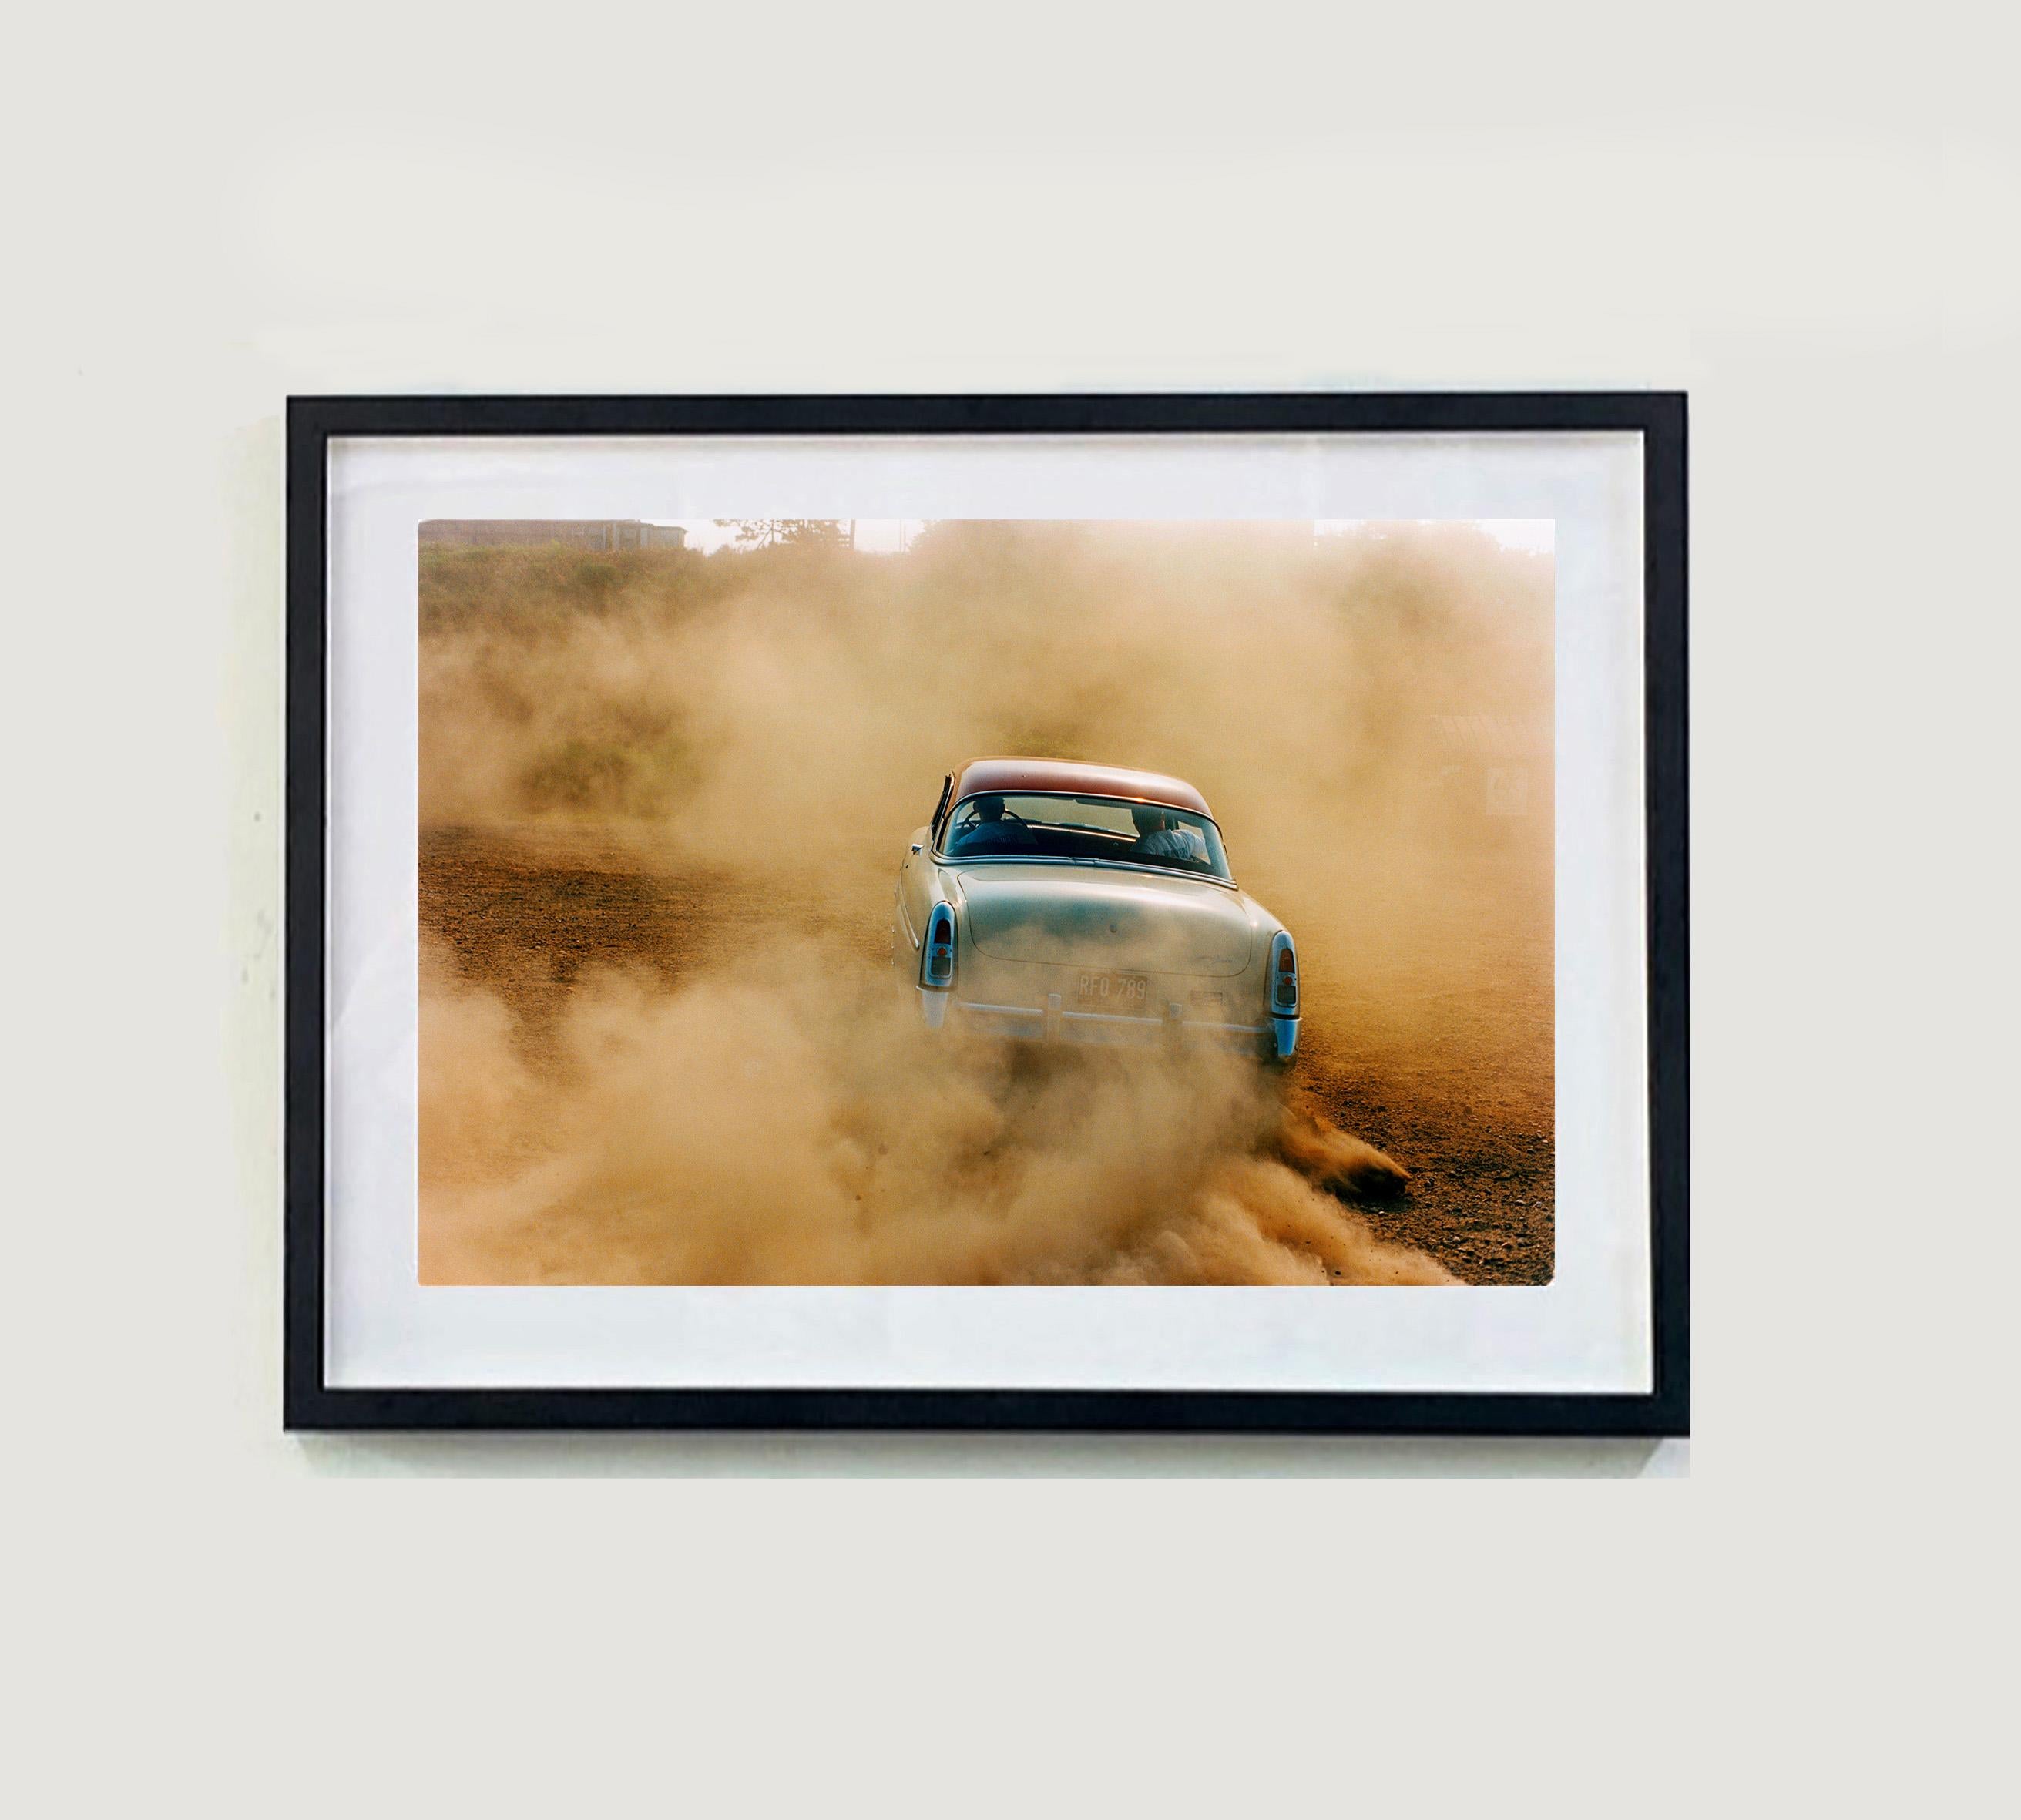 Mercury in the Dust, Hemsby, Norfolk - Car on a beach color photography - Photograph by Richard Heeps